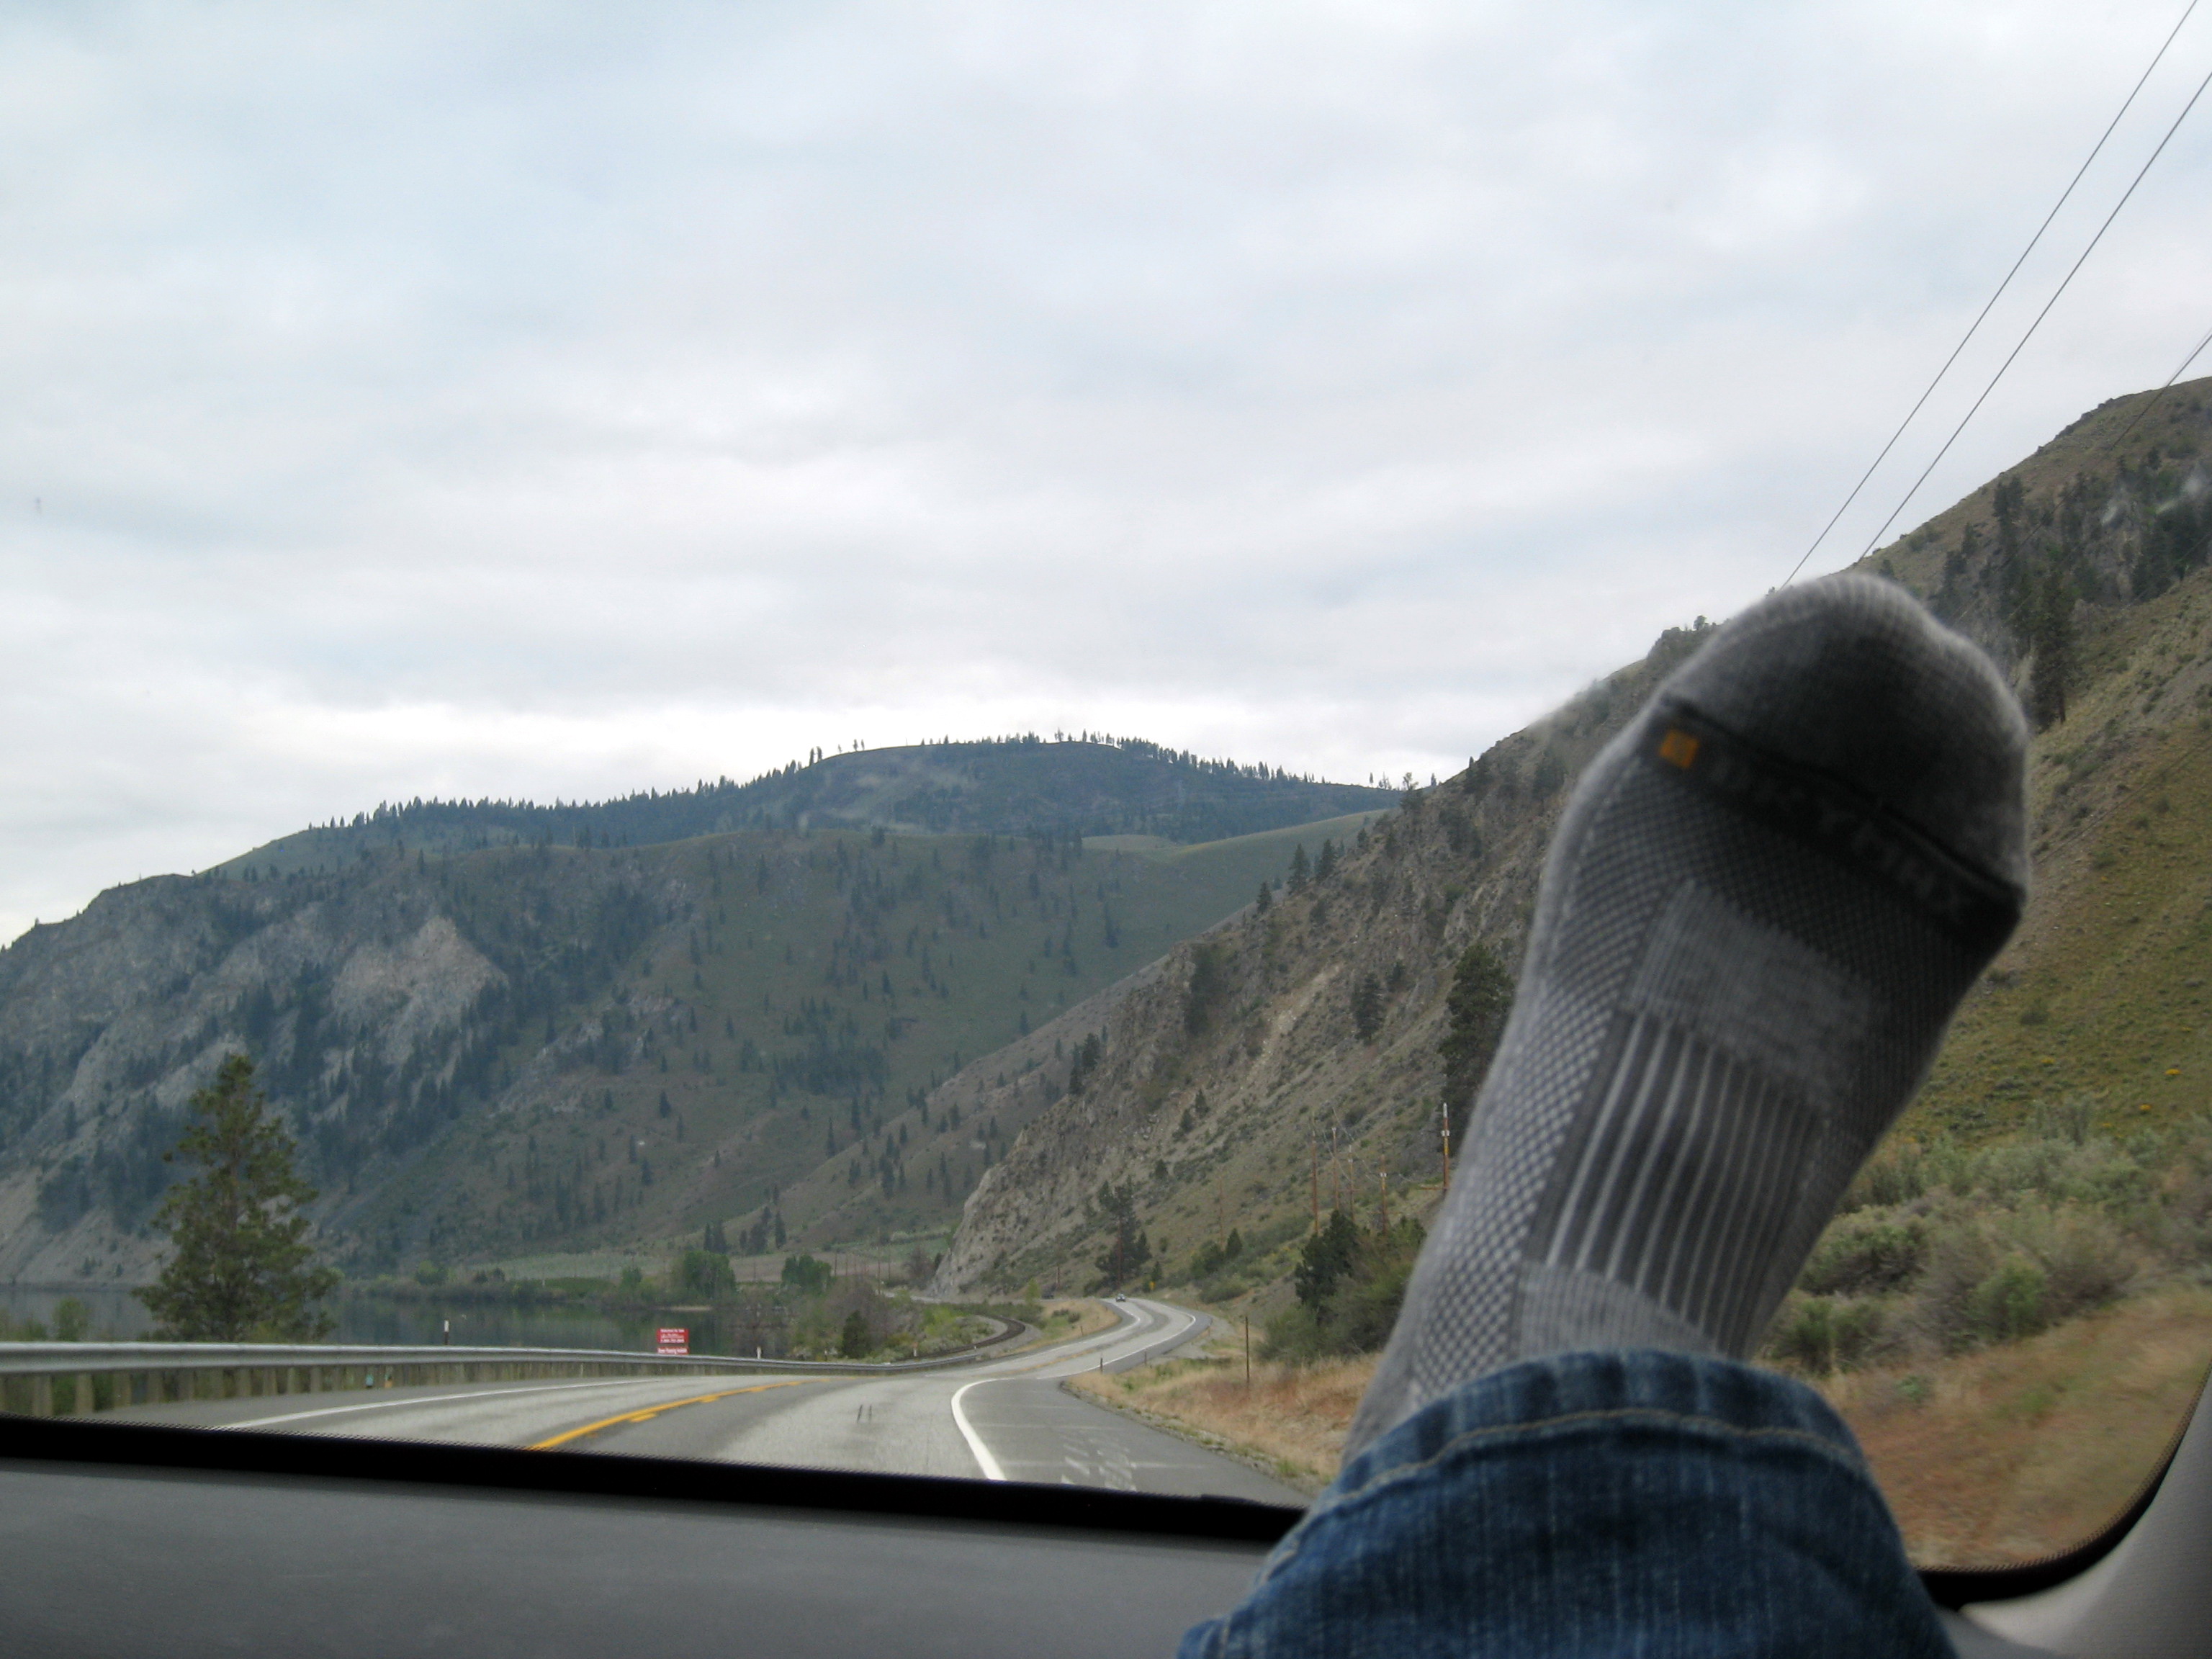 The ride home - view from the passenger seat.  Love those Drymax socks!